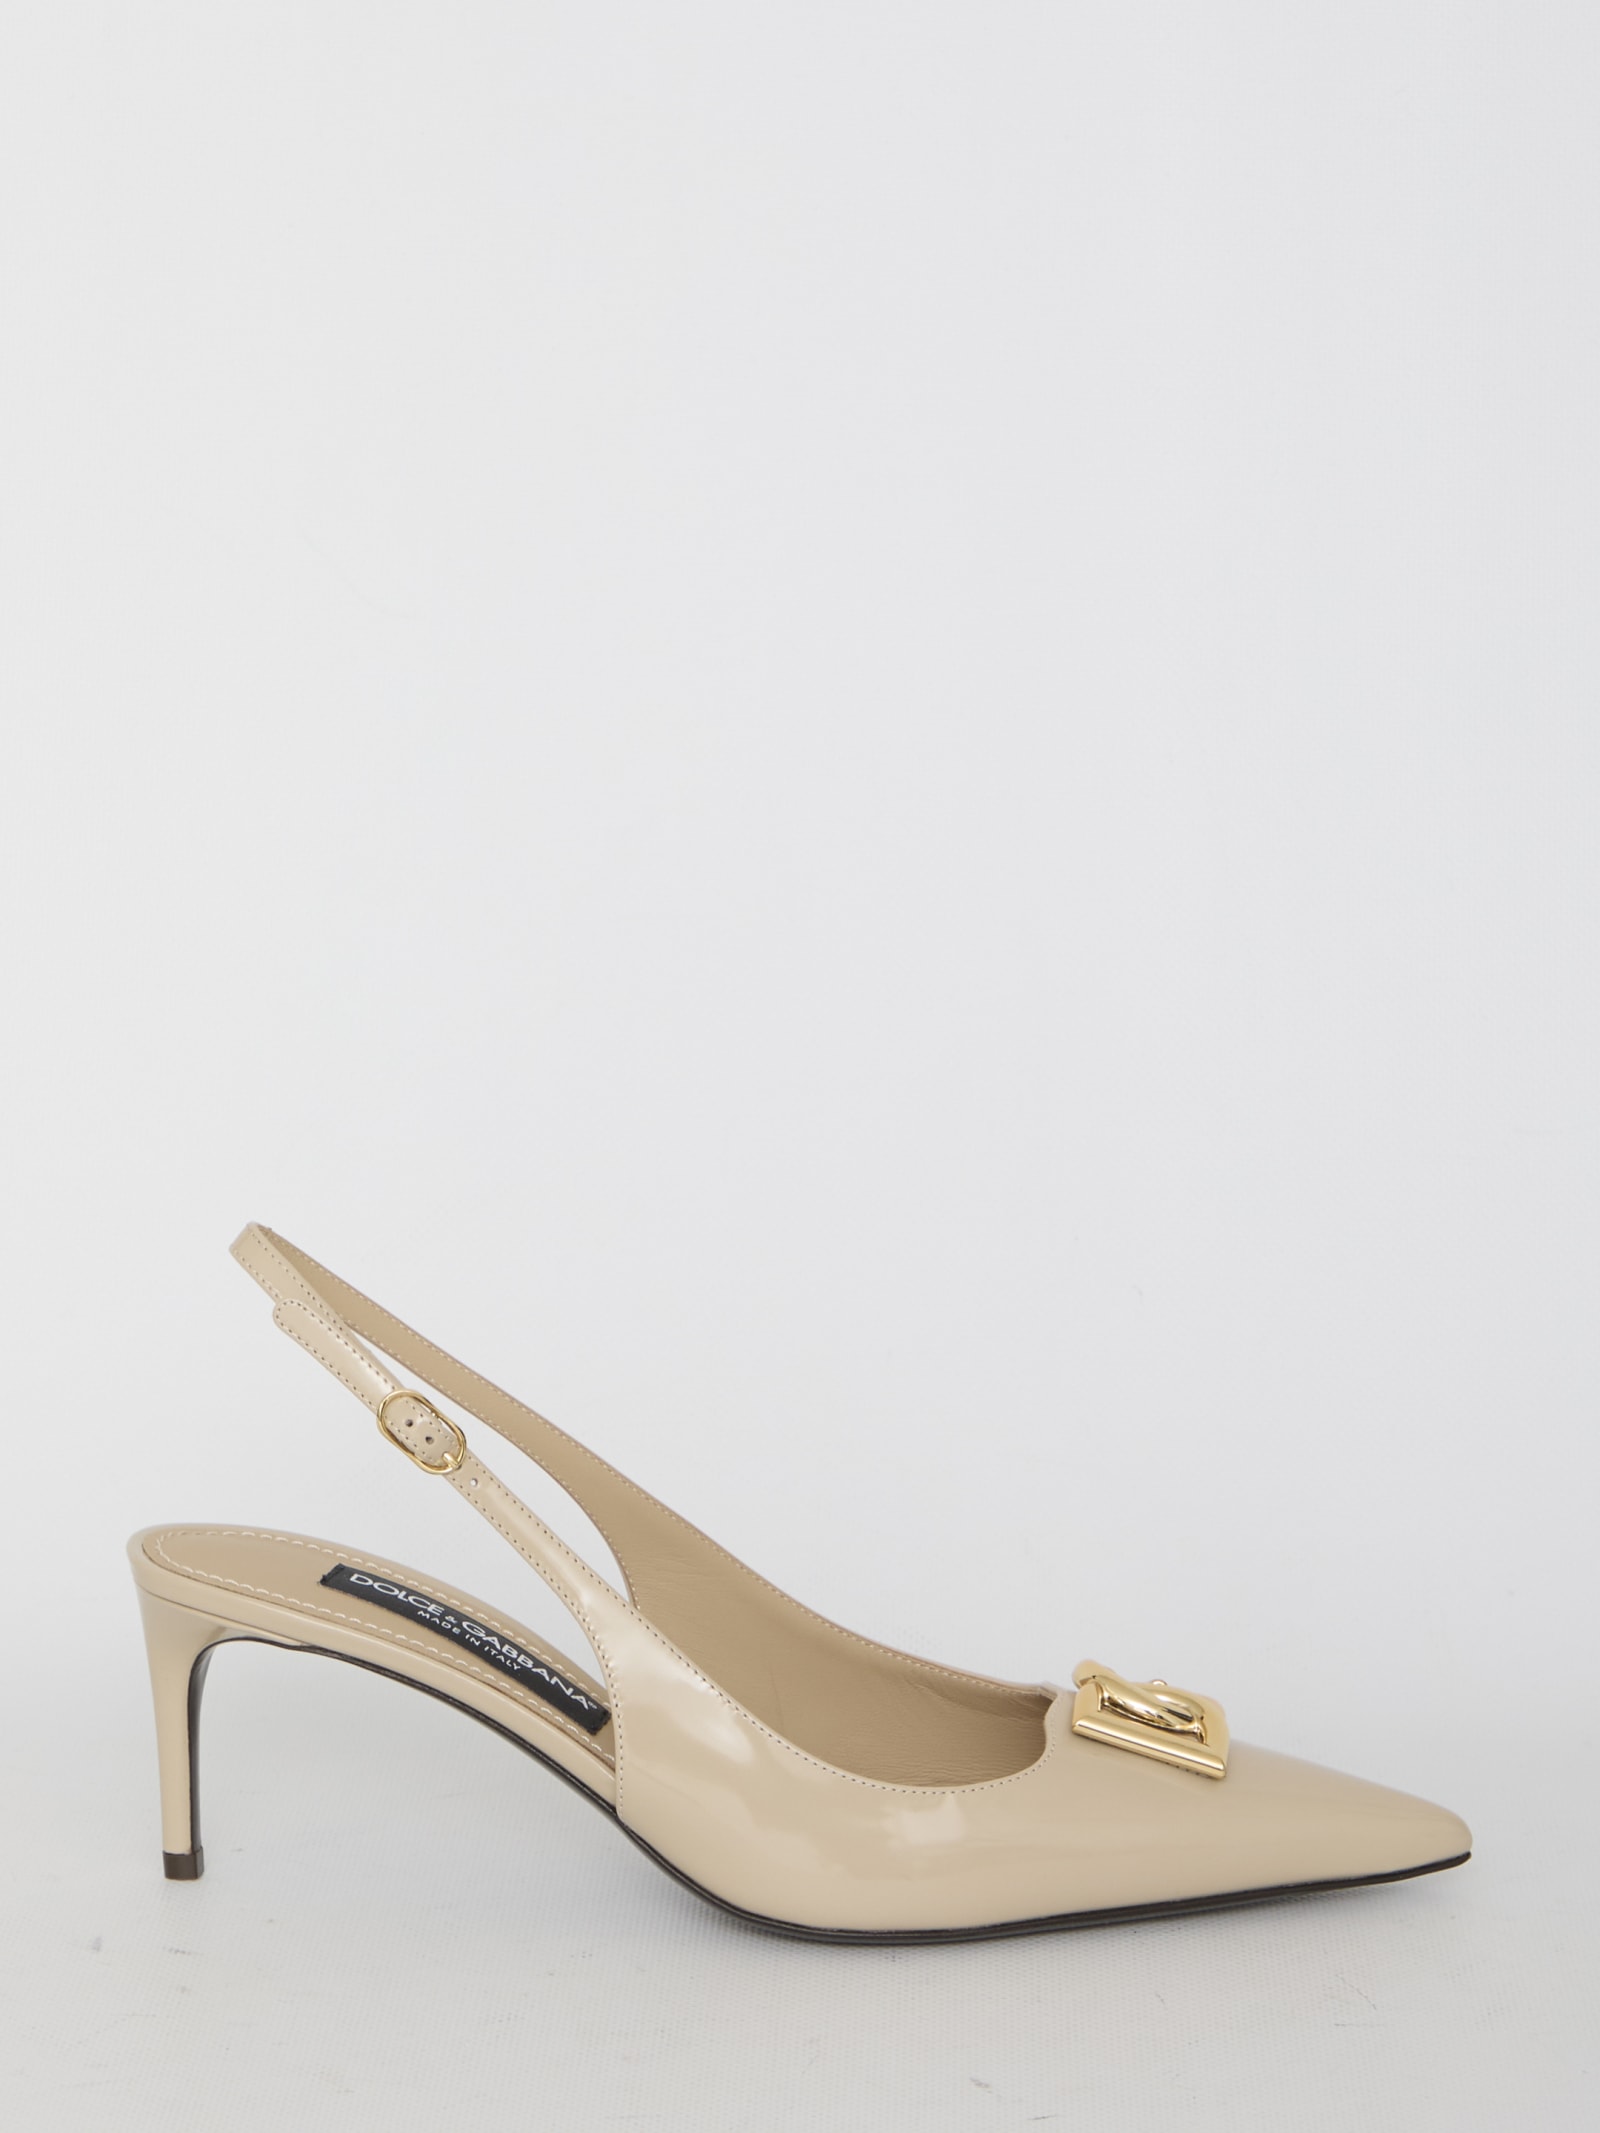 Dolce & Gabbana Slingback In Shiny Leather In Neutral